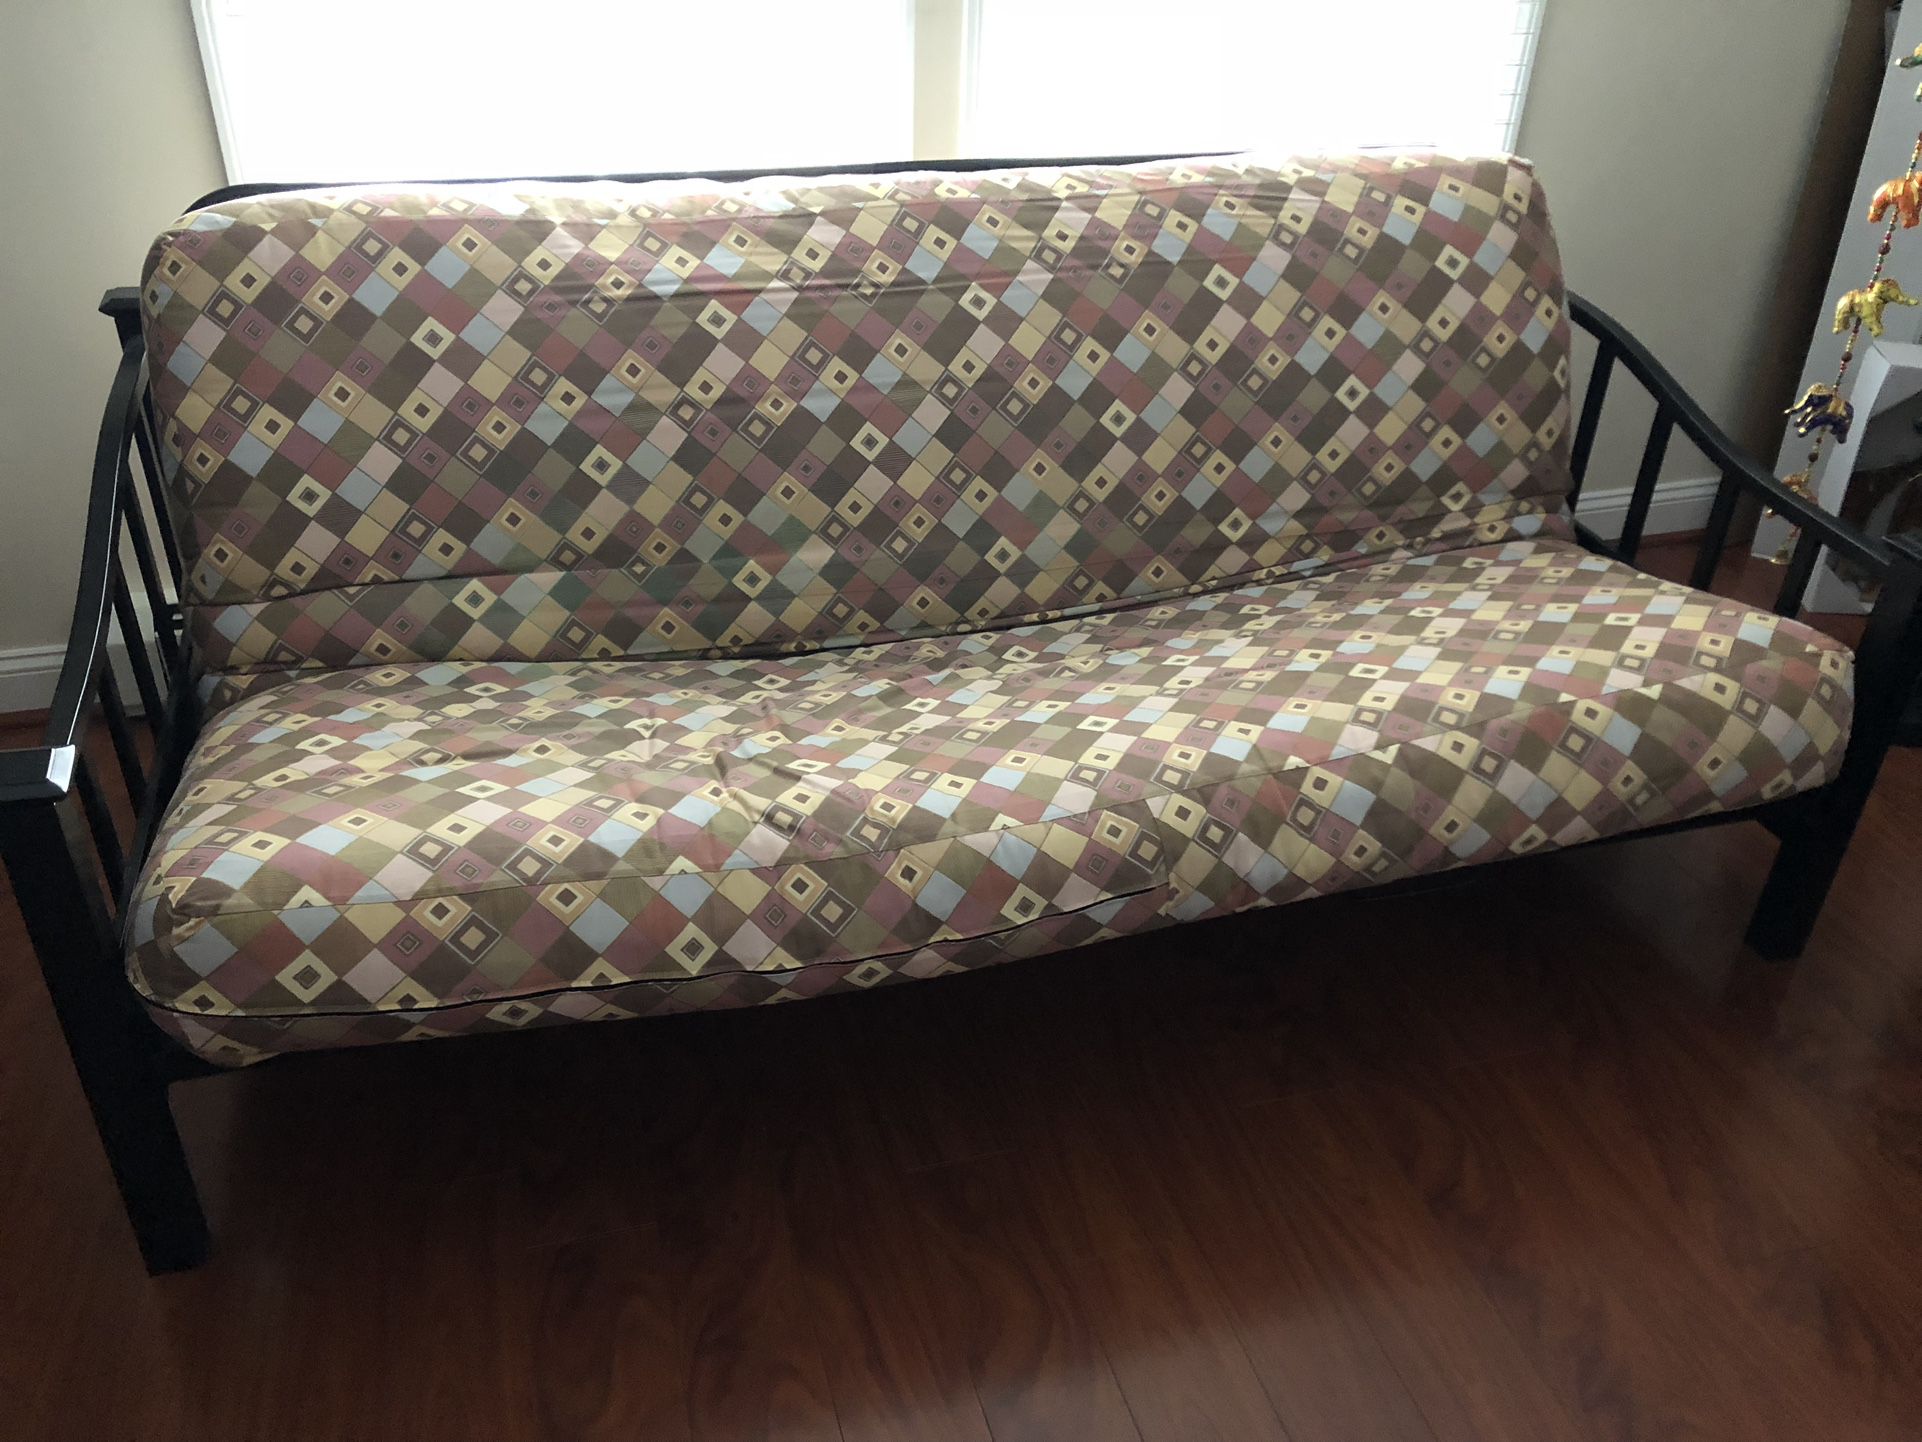 Futon With Black Metal Frame and Funky Patterned Futon Mattress